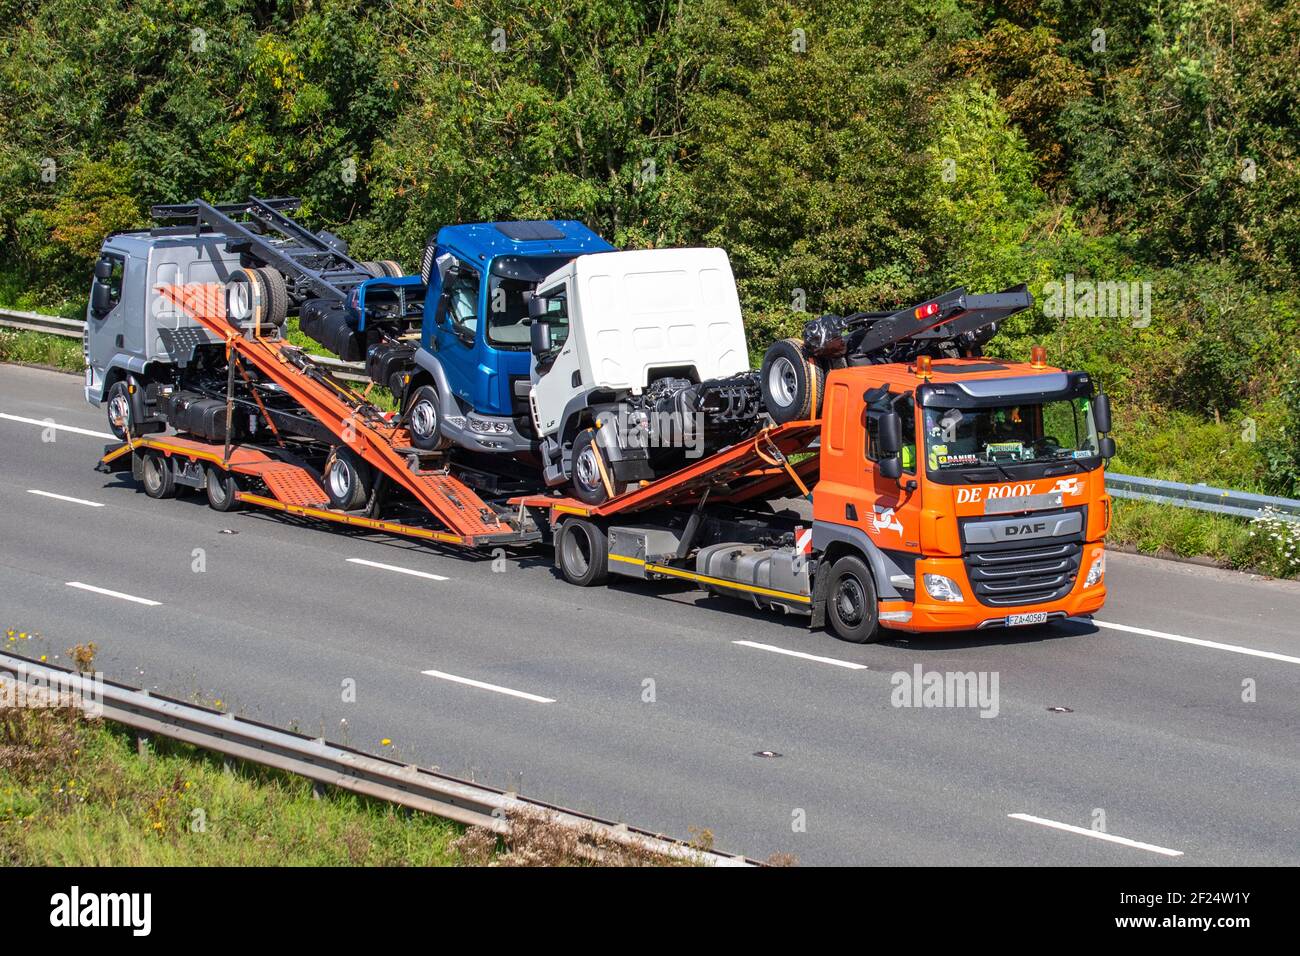 De Rooy Leyland Haulage delivery trucks, lorry, transportation, truck, cargo carrier, new DAF tractor units, European commercial transport, industry, M61 at Manchester, UK Stock Photo